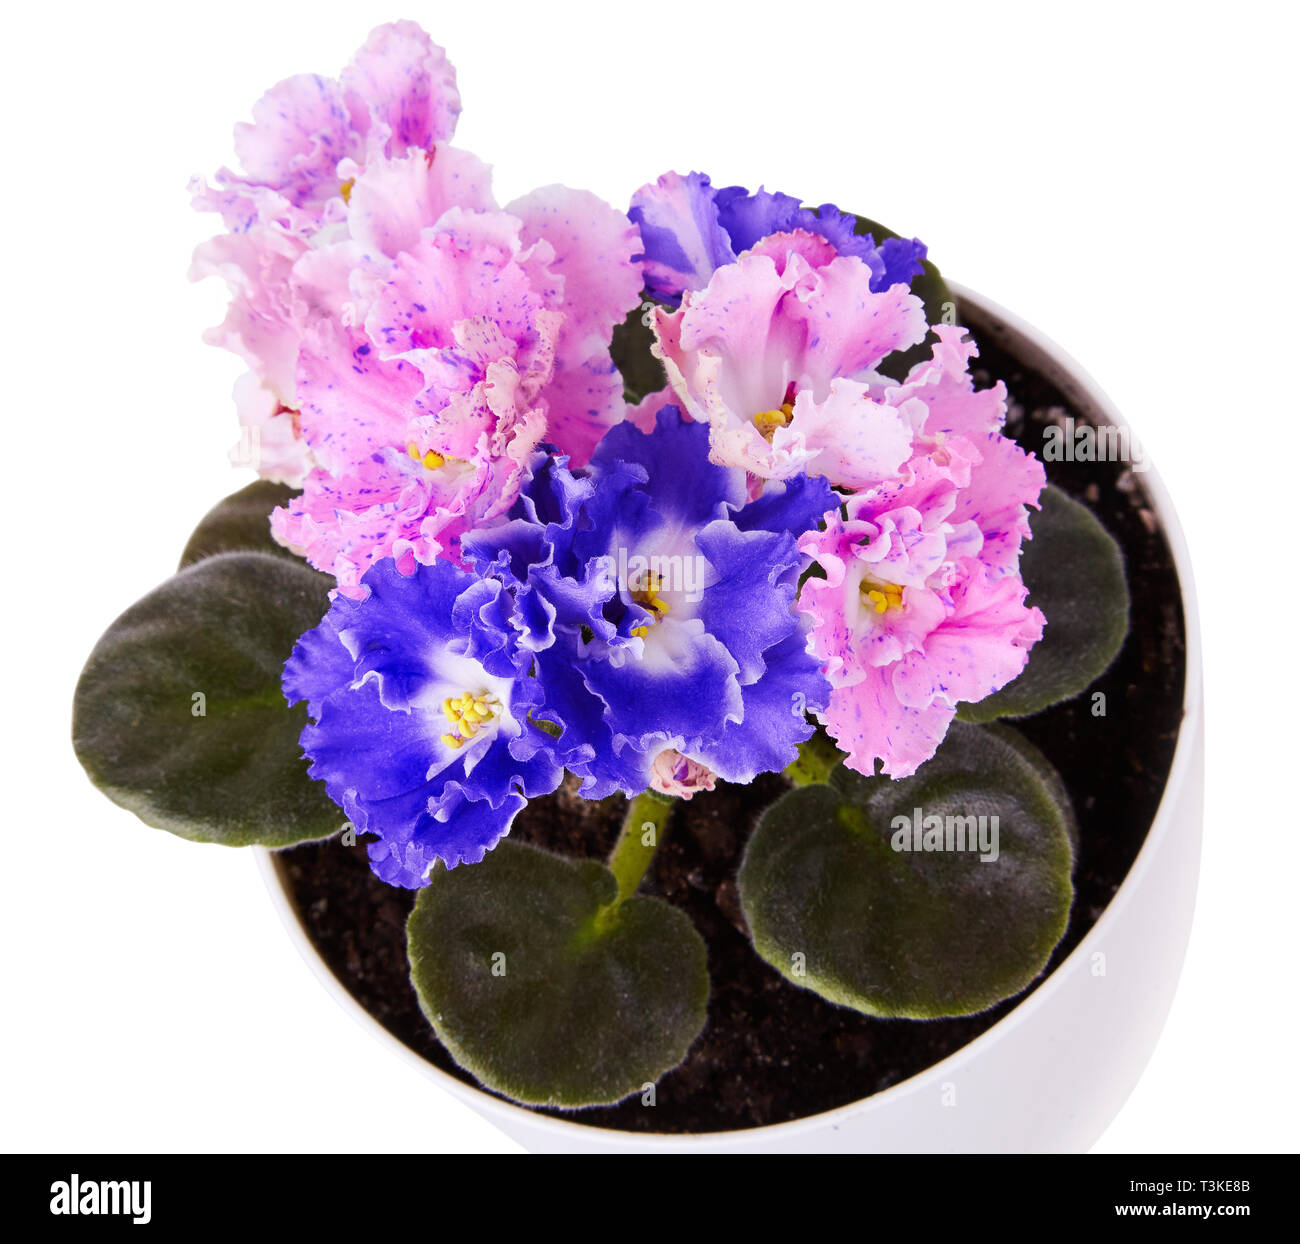 Close up of beautiful duocolor hybrid pink and blue saintpaulia (African violets)  flower  with wavy  edge in the pot. Stock Photo